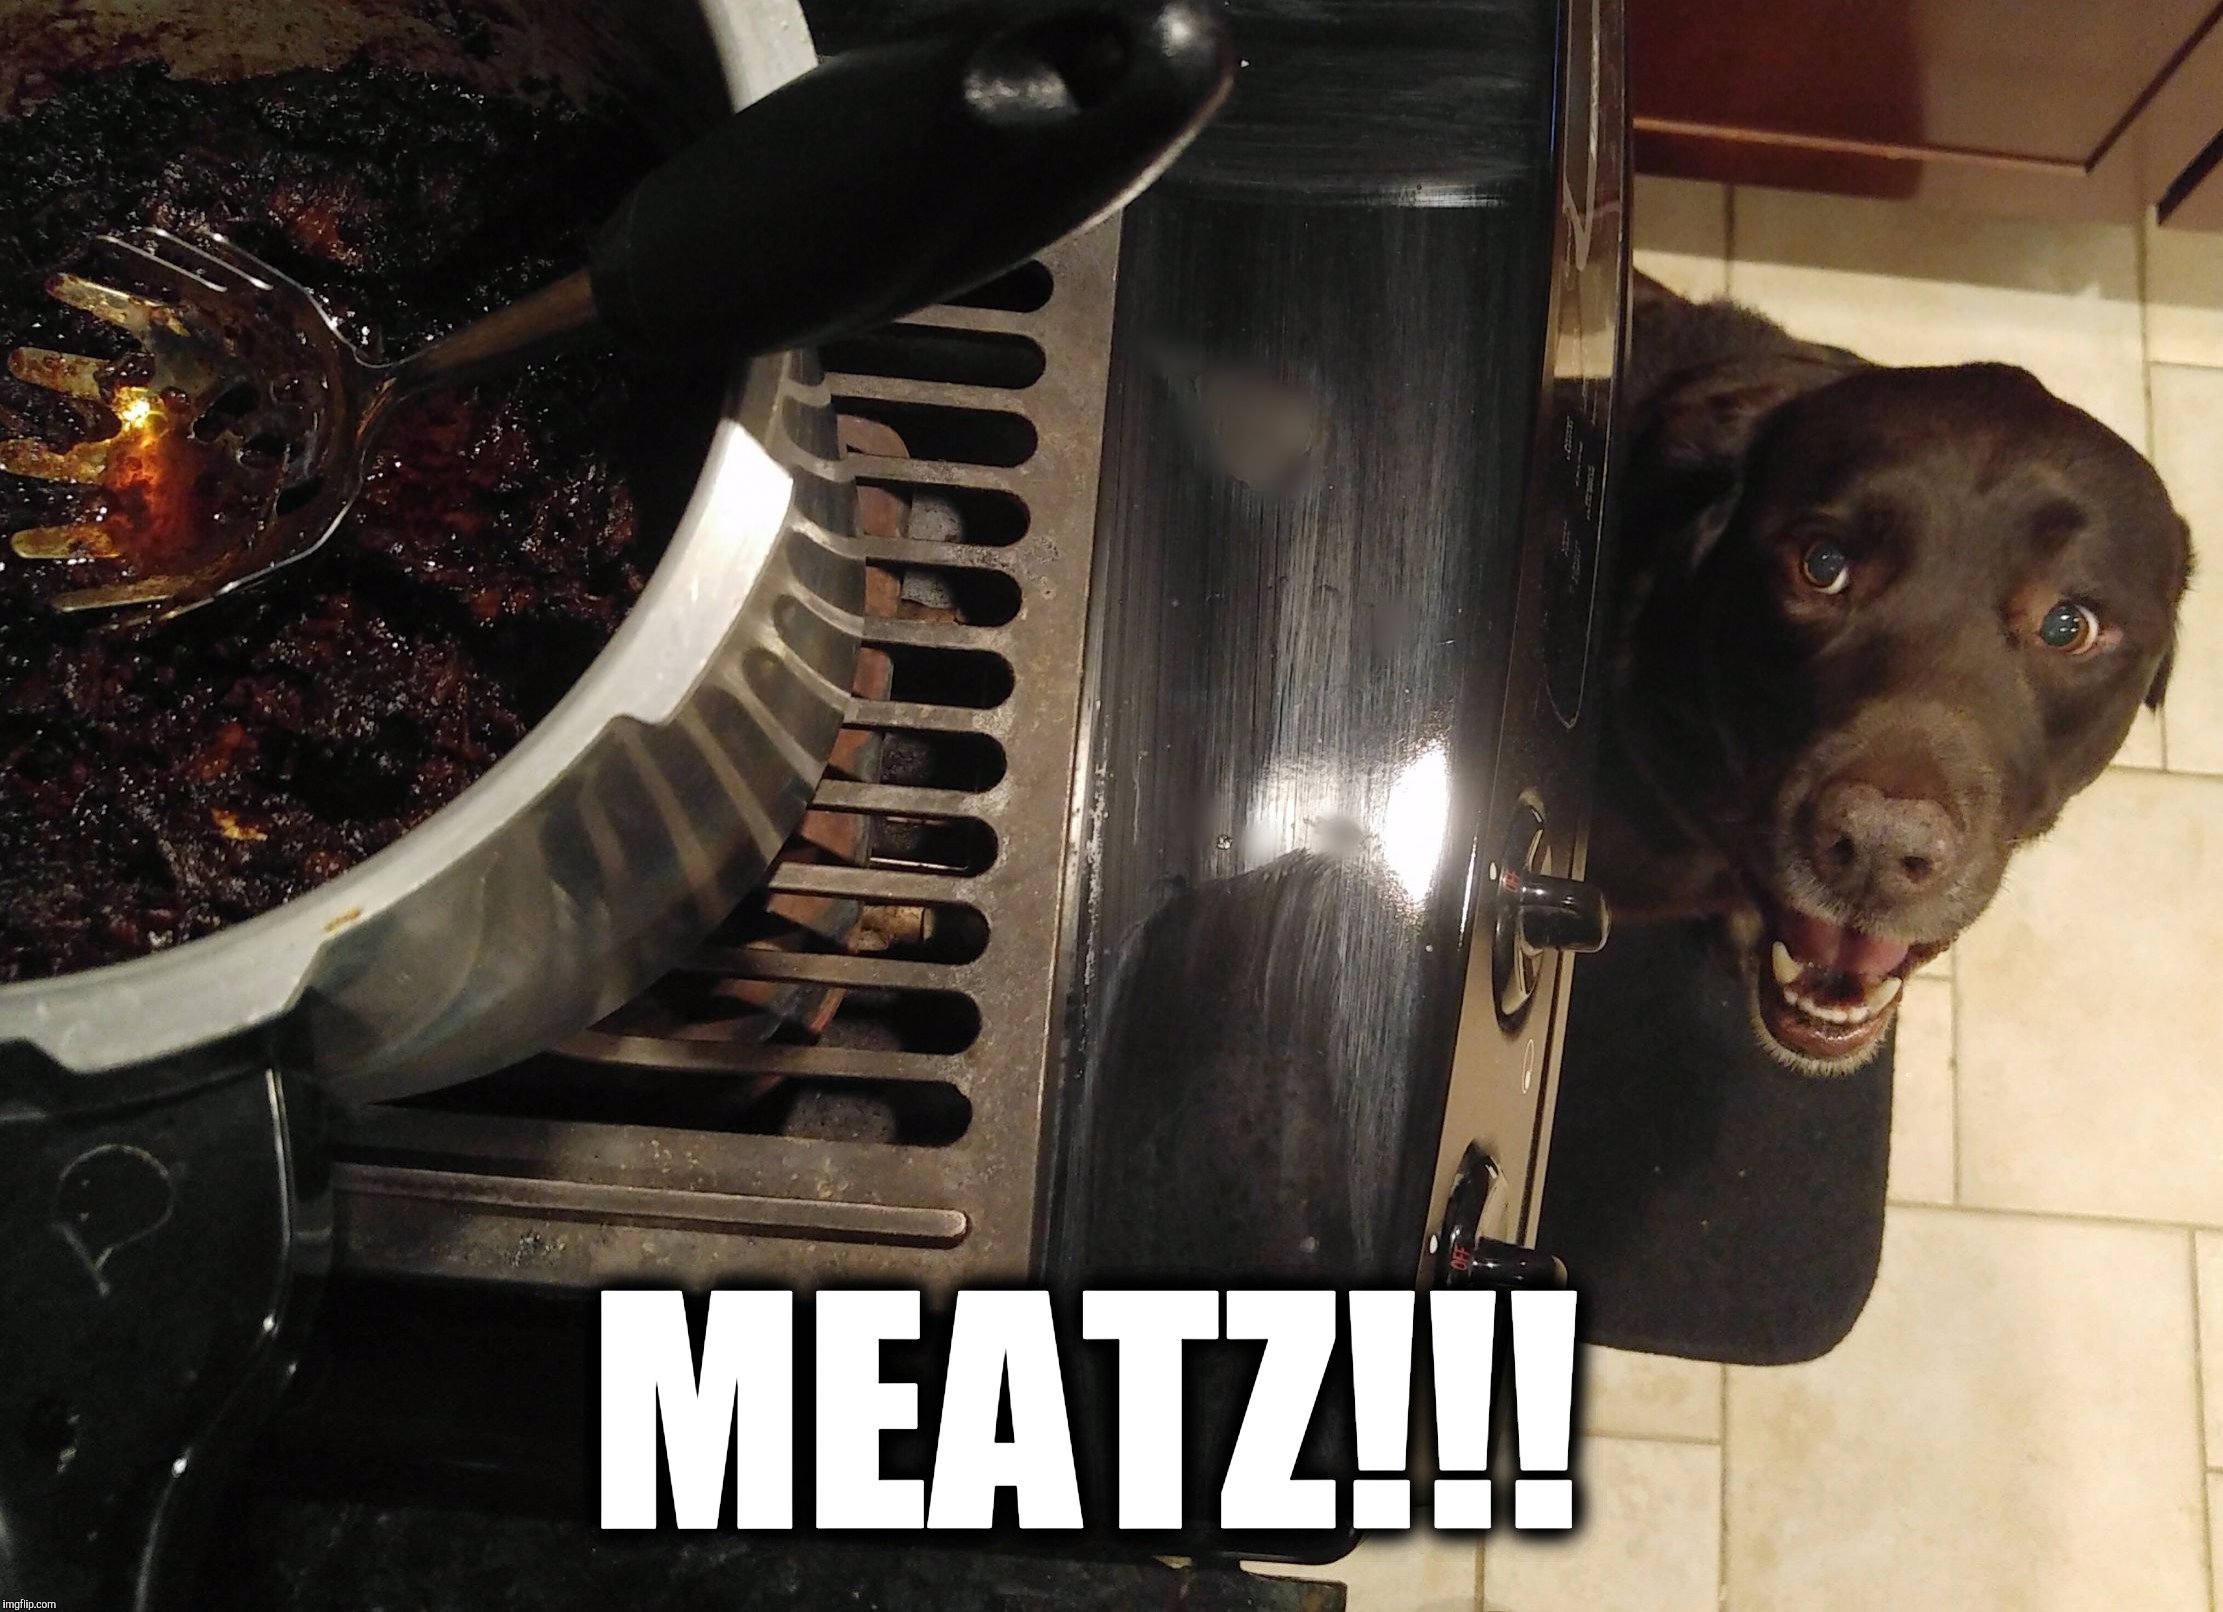 MEATZ!!! | image tagged in chuckie the chocolate lab | made w/ Imgflip meme maker